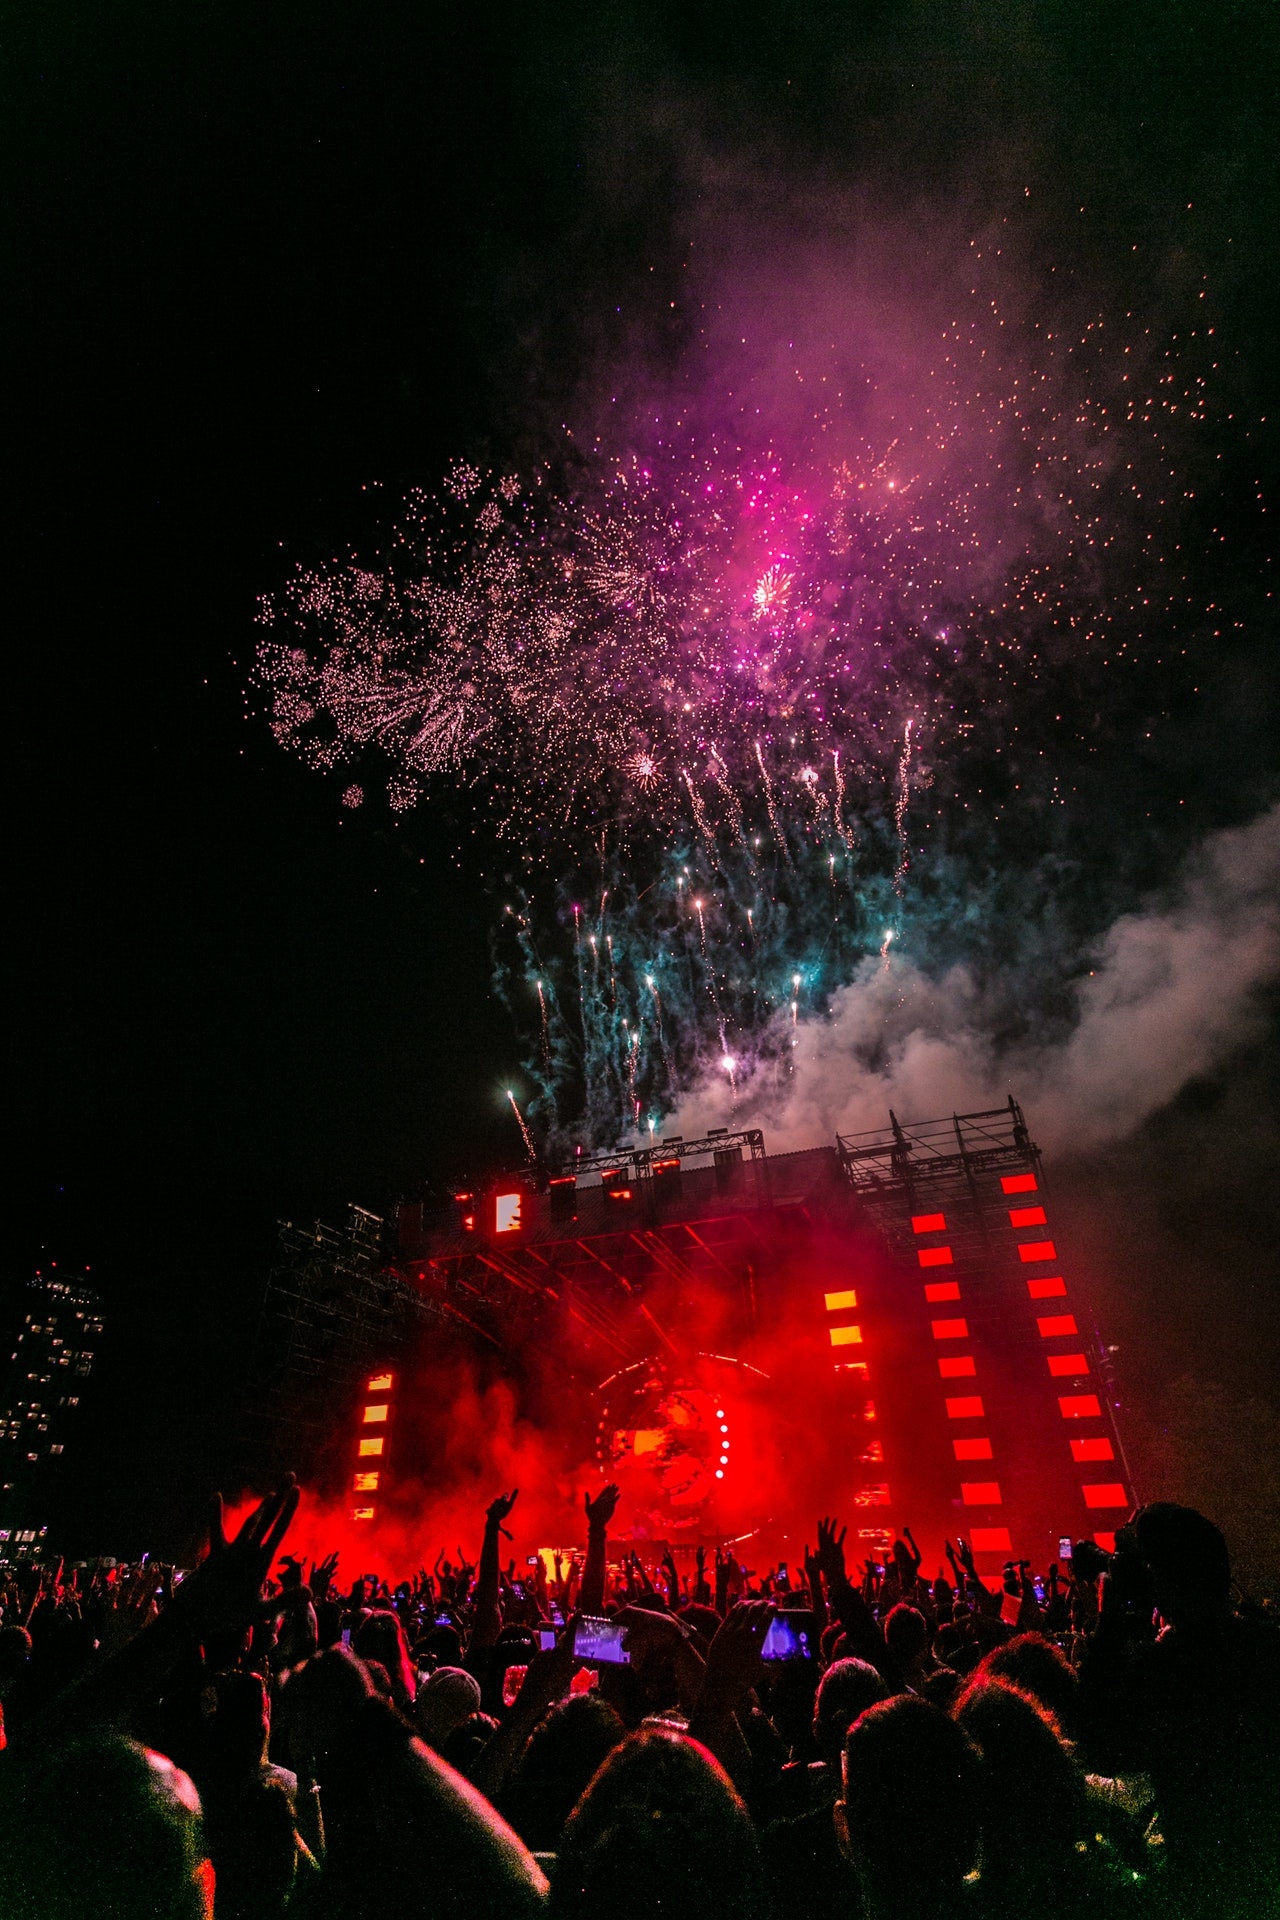 Concert: Big music festival, Special effects, Fireworks lit up the crowd. 1280x1920 HD Background.